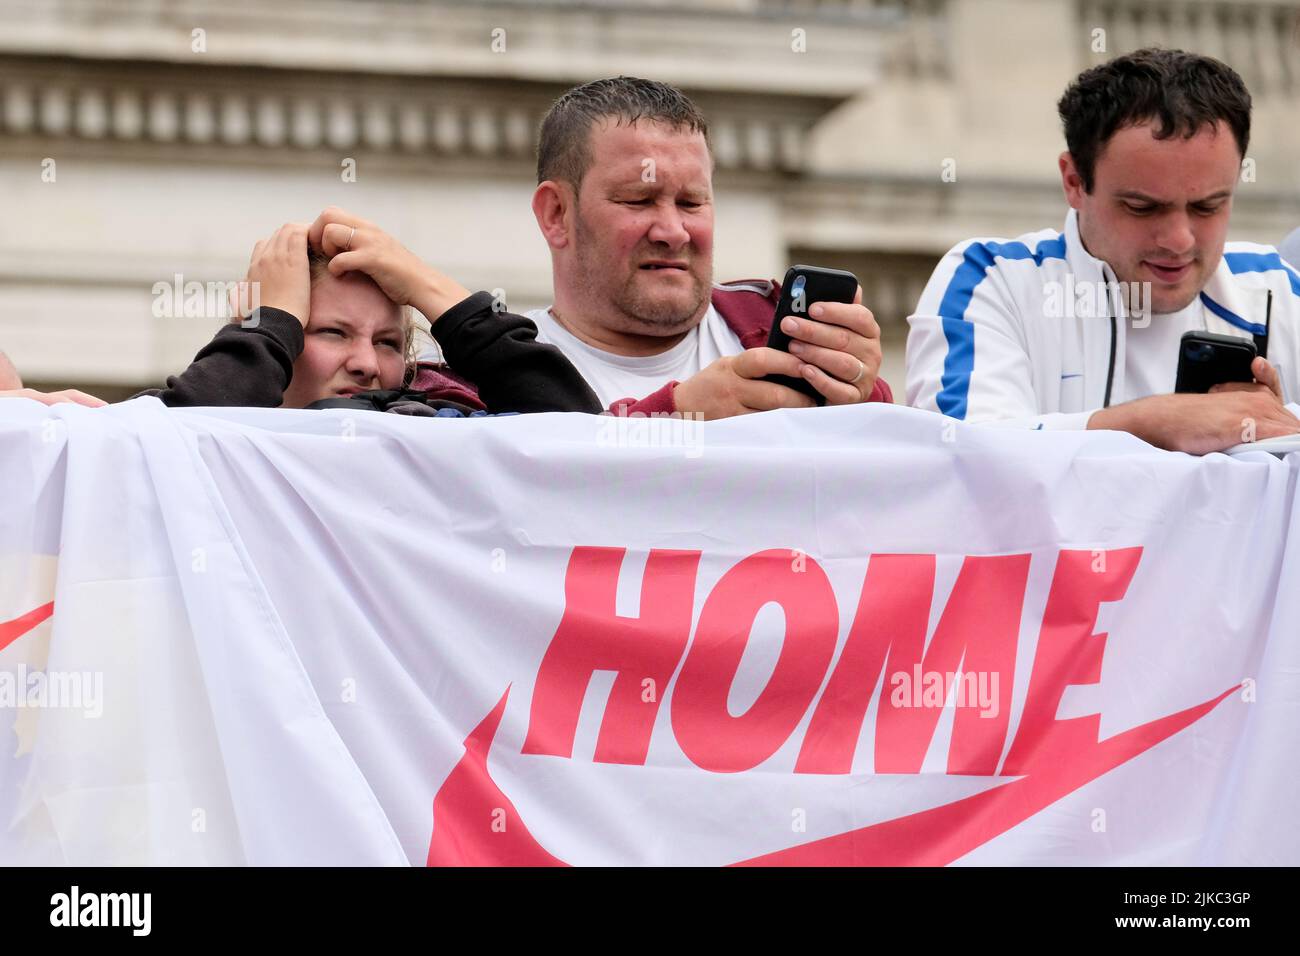 Trafalgar Square, London, UK. 1st Aug 2022. The Lionesses and their fans celebrate winning the UEFA Women's EURO England 2022. Credit: Matthew Chattle/Alamy Live News Stock Photo